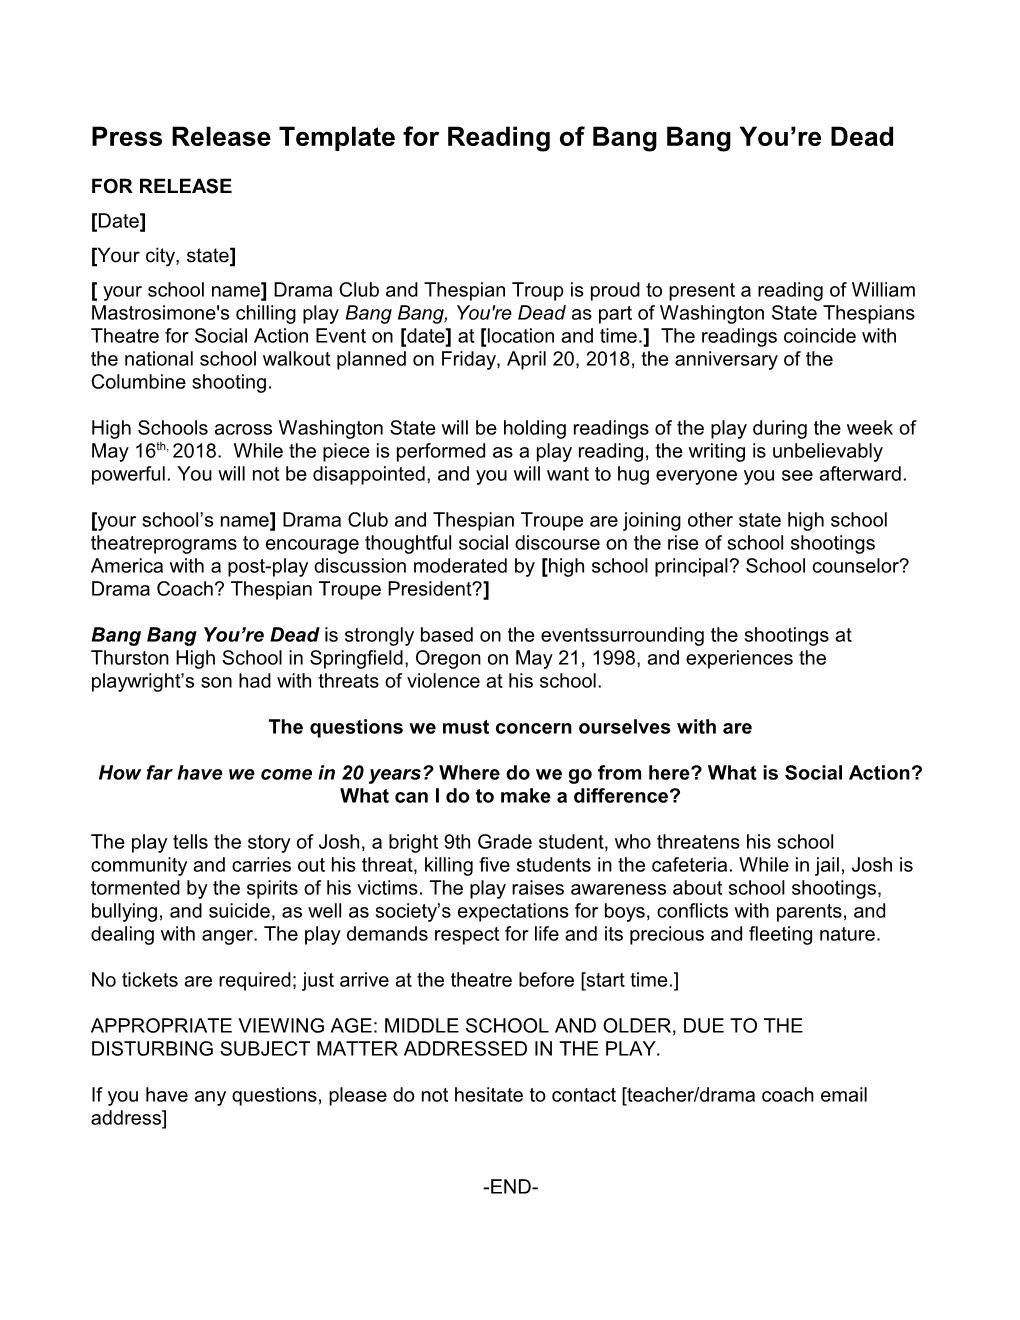 Press Release Template for Reading of Bang Bang You Re Dead